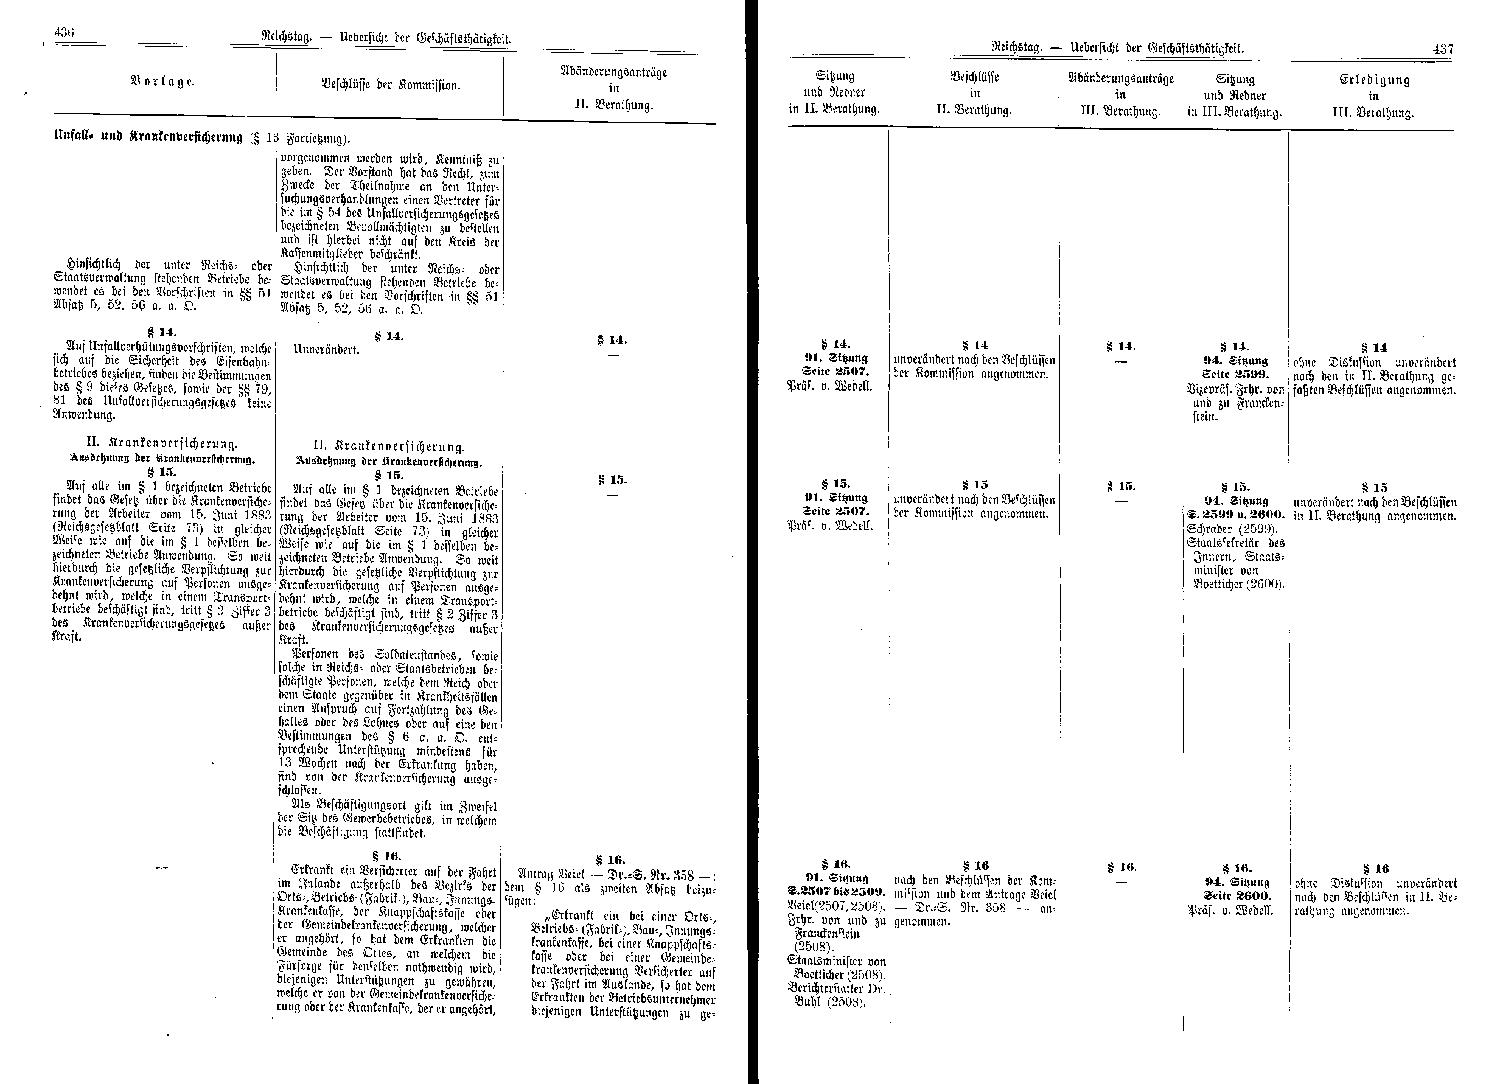 Scan of page 436-437